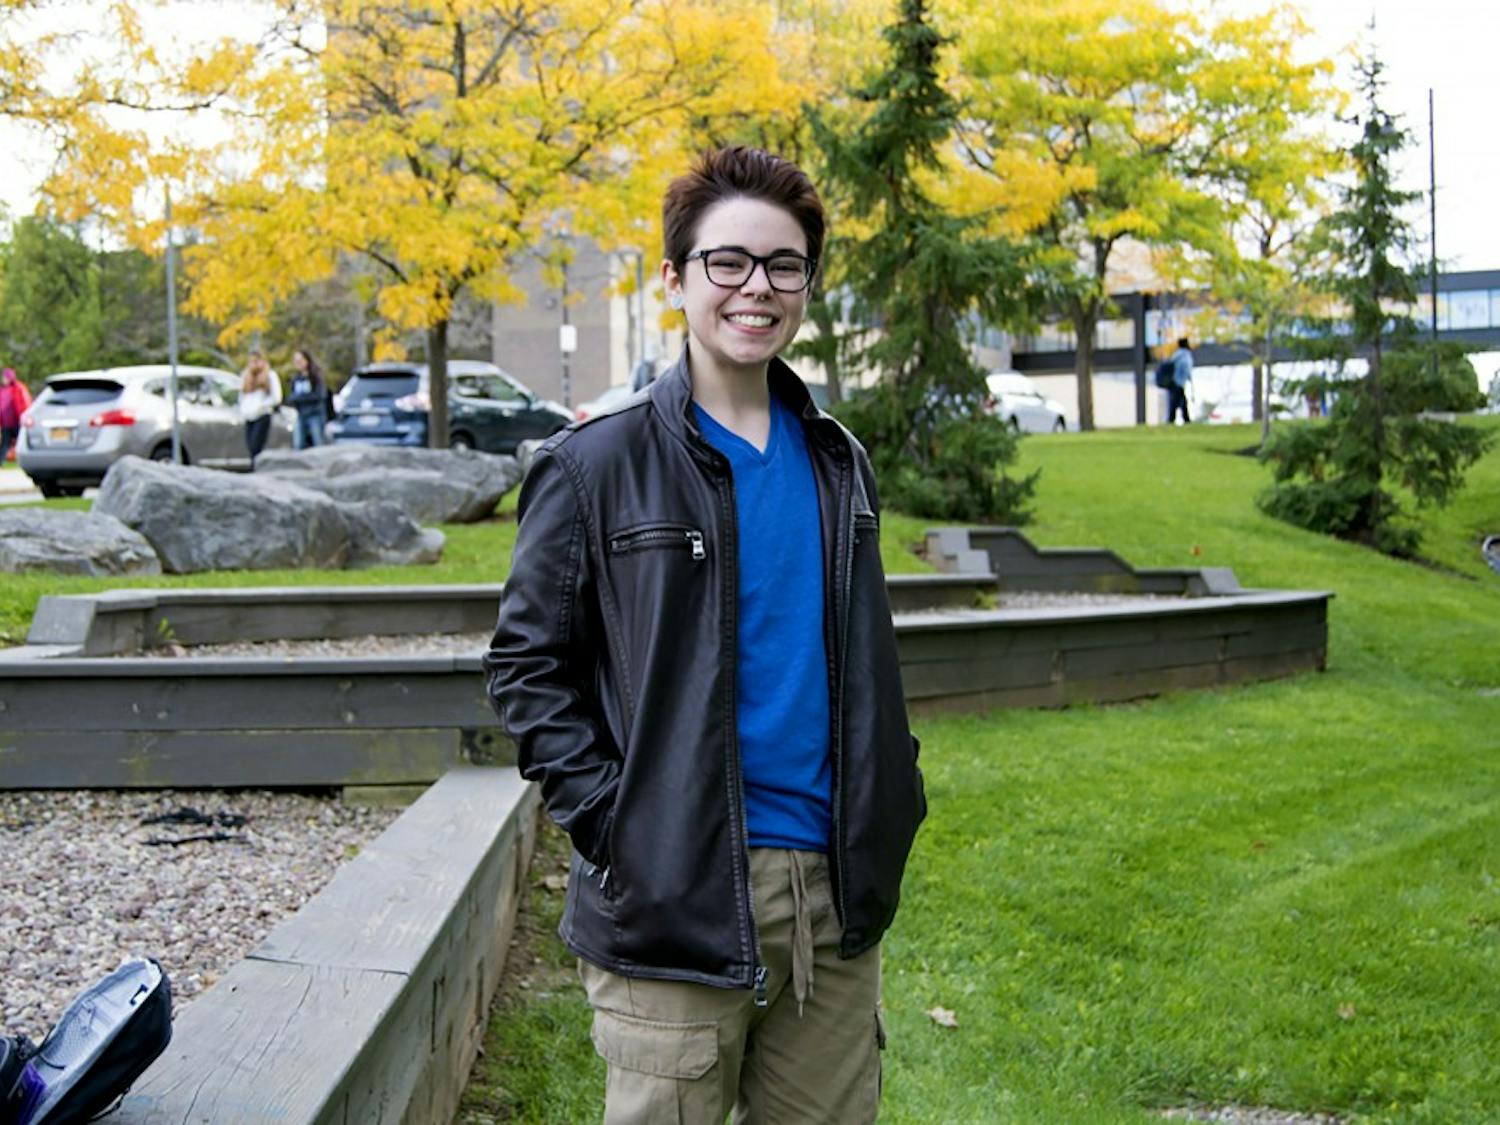 Sophomore English major Tanner Miller used to notify all of his professors that he preferred "Tanner" instead of his birth name. Now with UB's new Student Preferred Name Policy, students have the option to enter their preferred name on HUB.